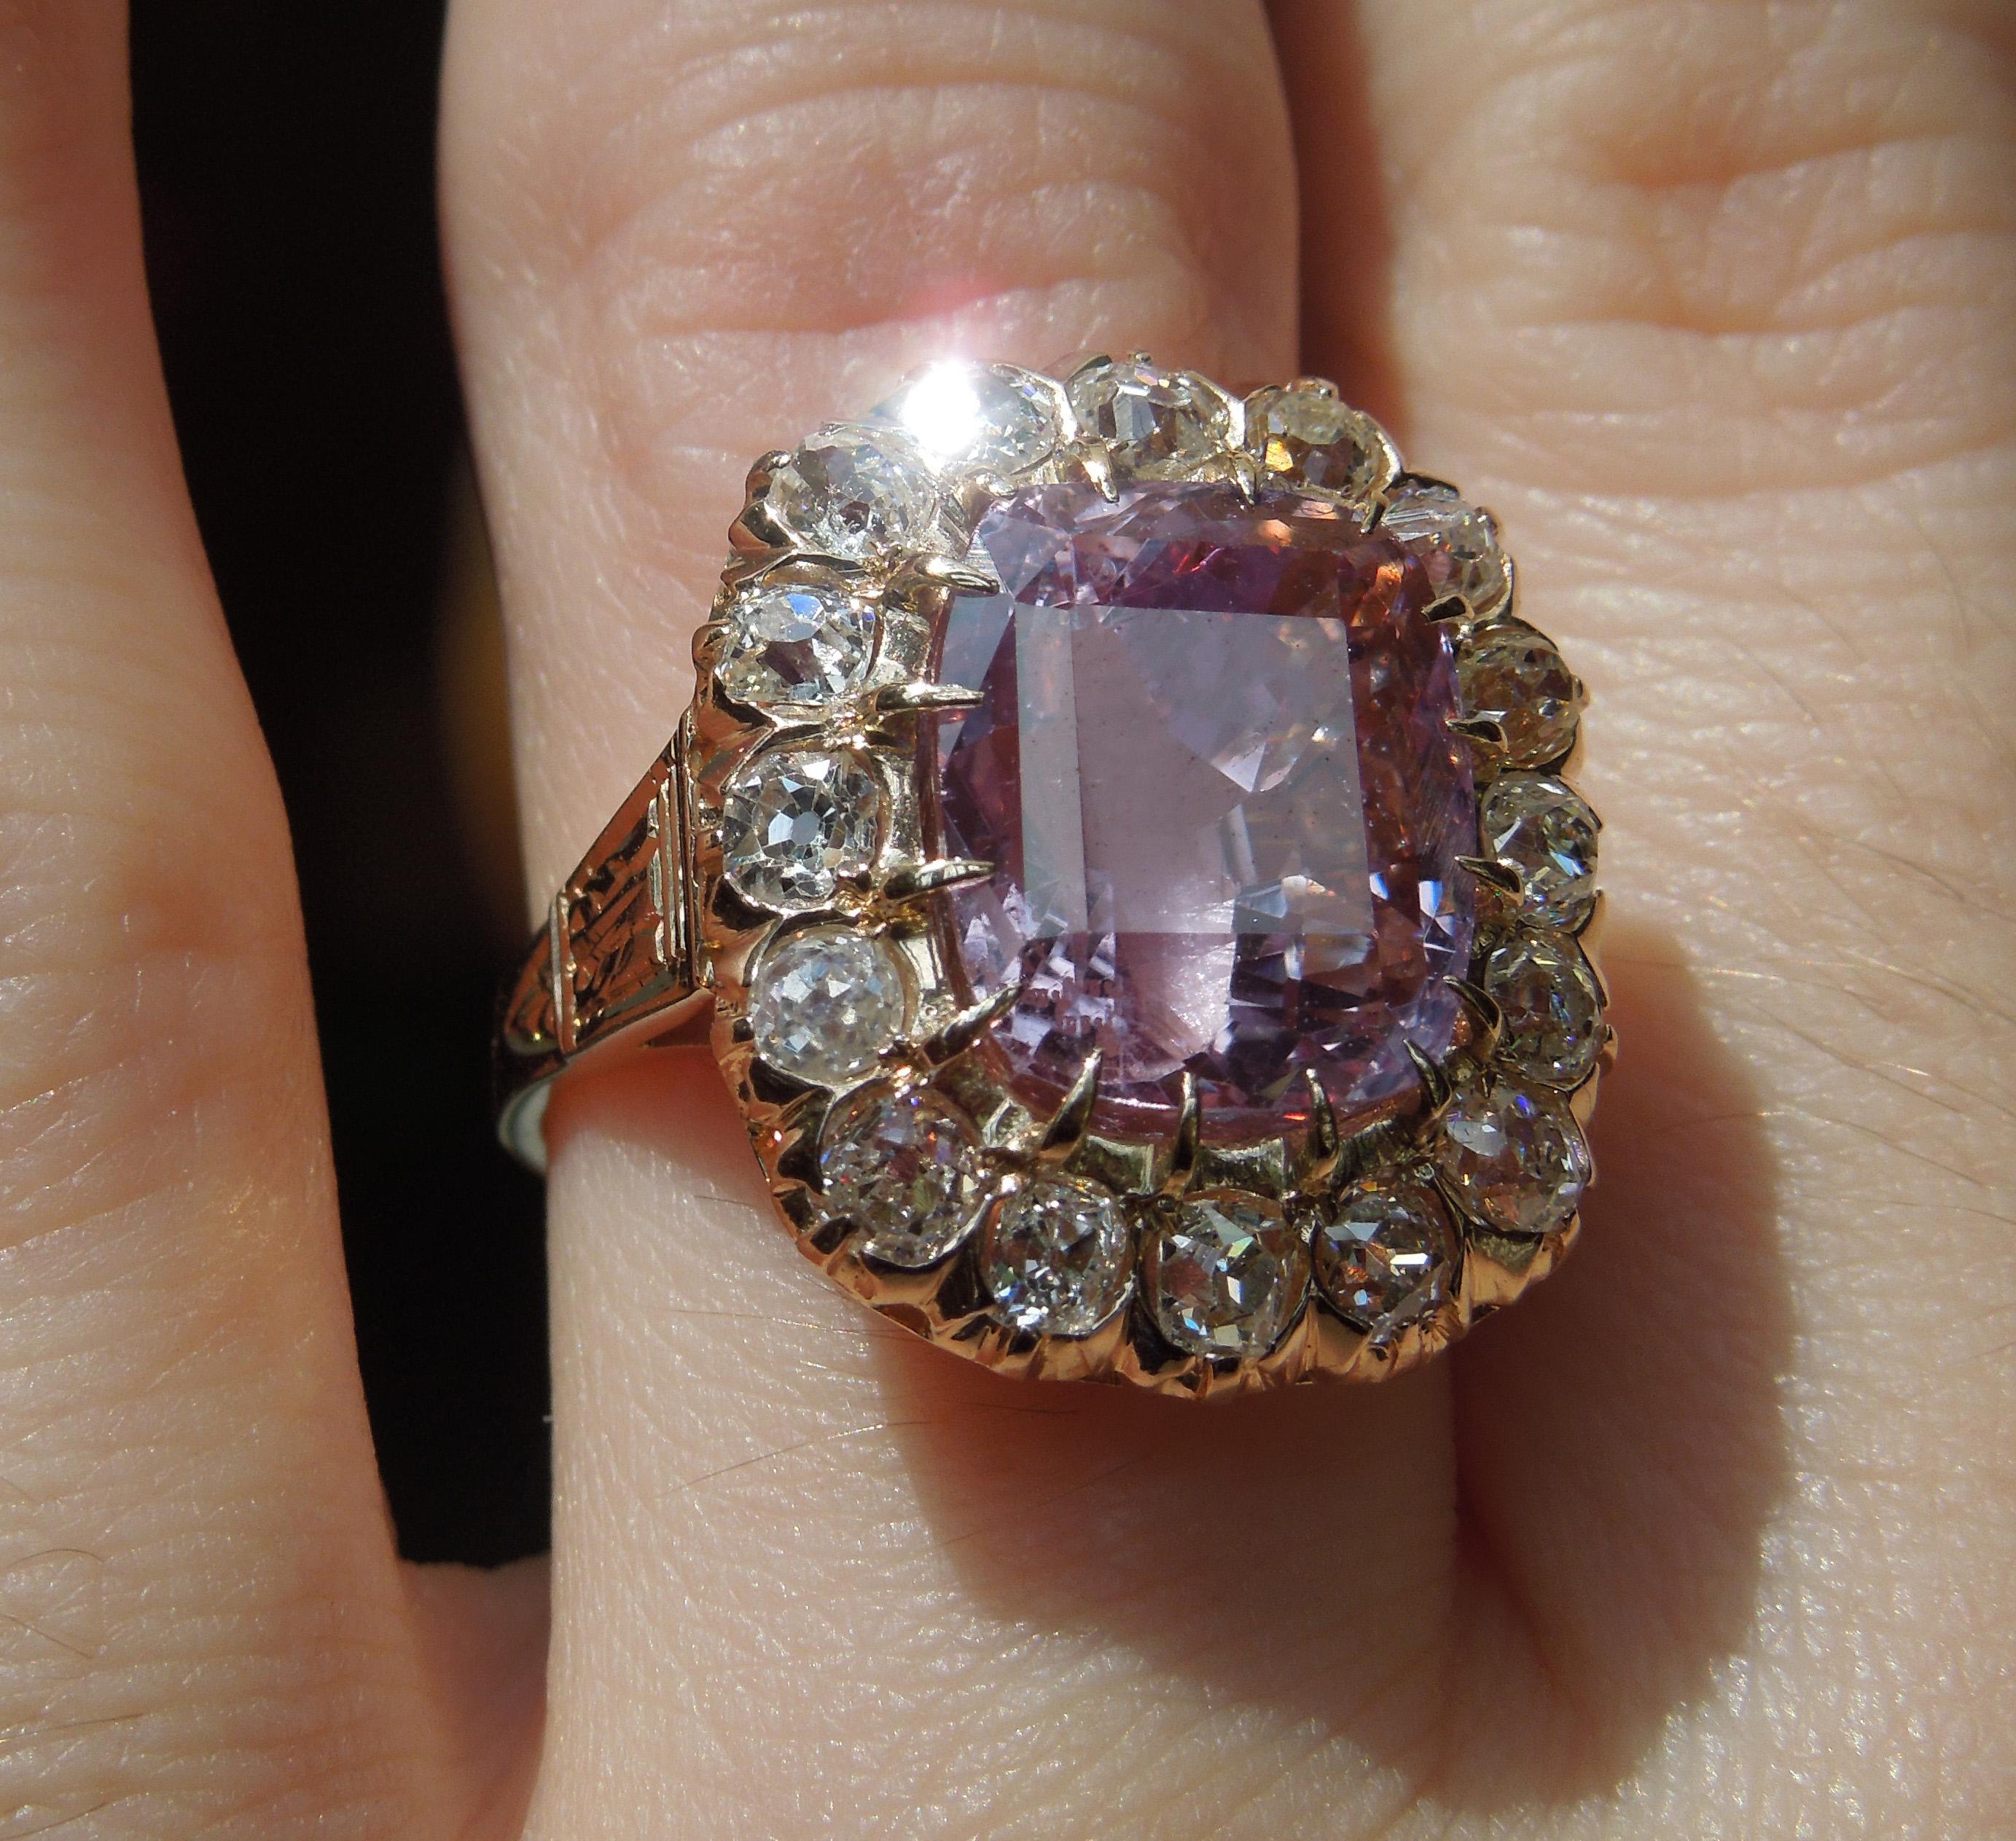 From our Beverly Hills Estate Collection, this GIA Certified Pink Sapphire is a Victorian period piece. A rare bubblegum pink shade with no heat treatments or artificial enhancements [at a fraction of the cost of a natural purplish pink earth-mined